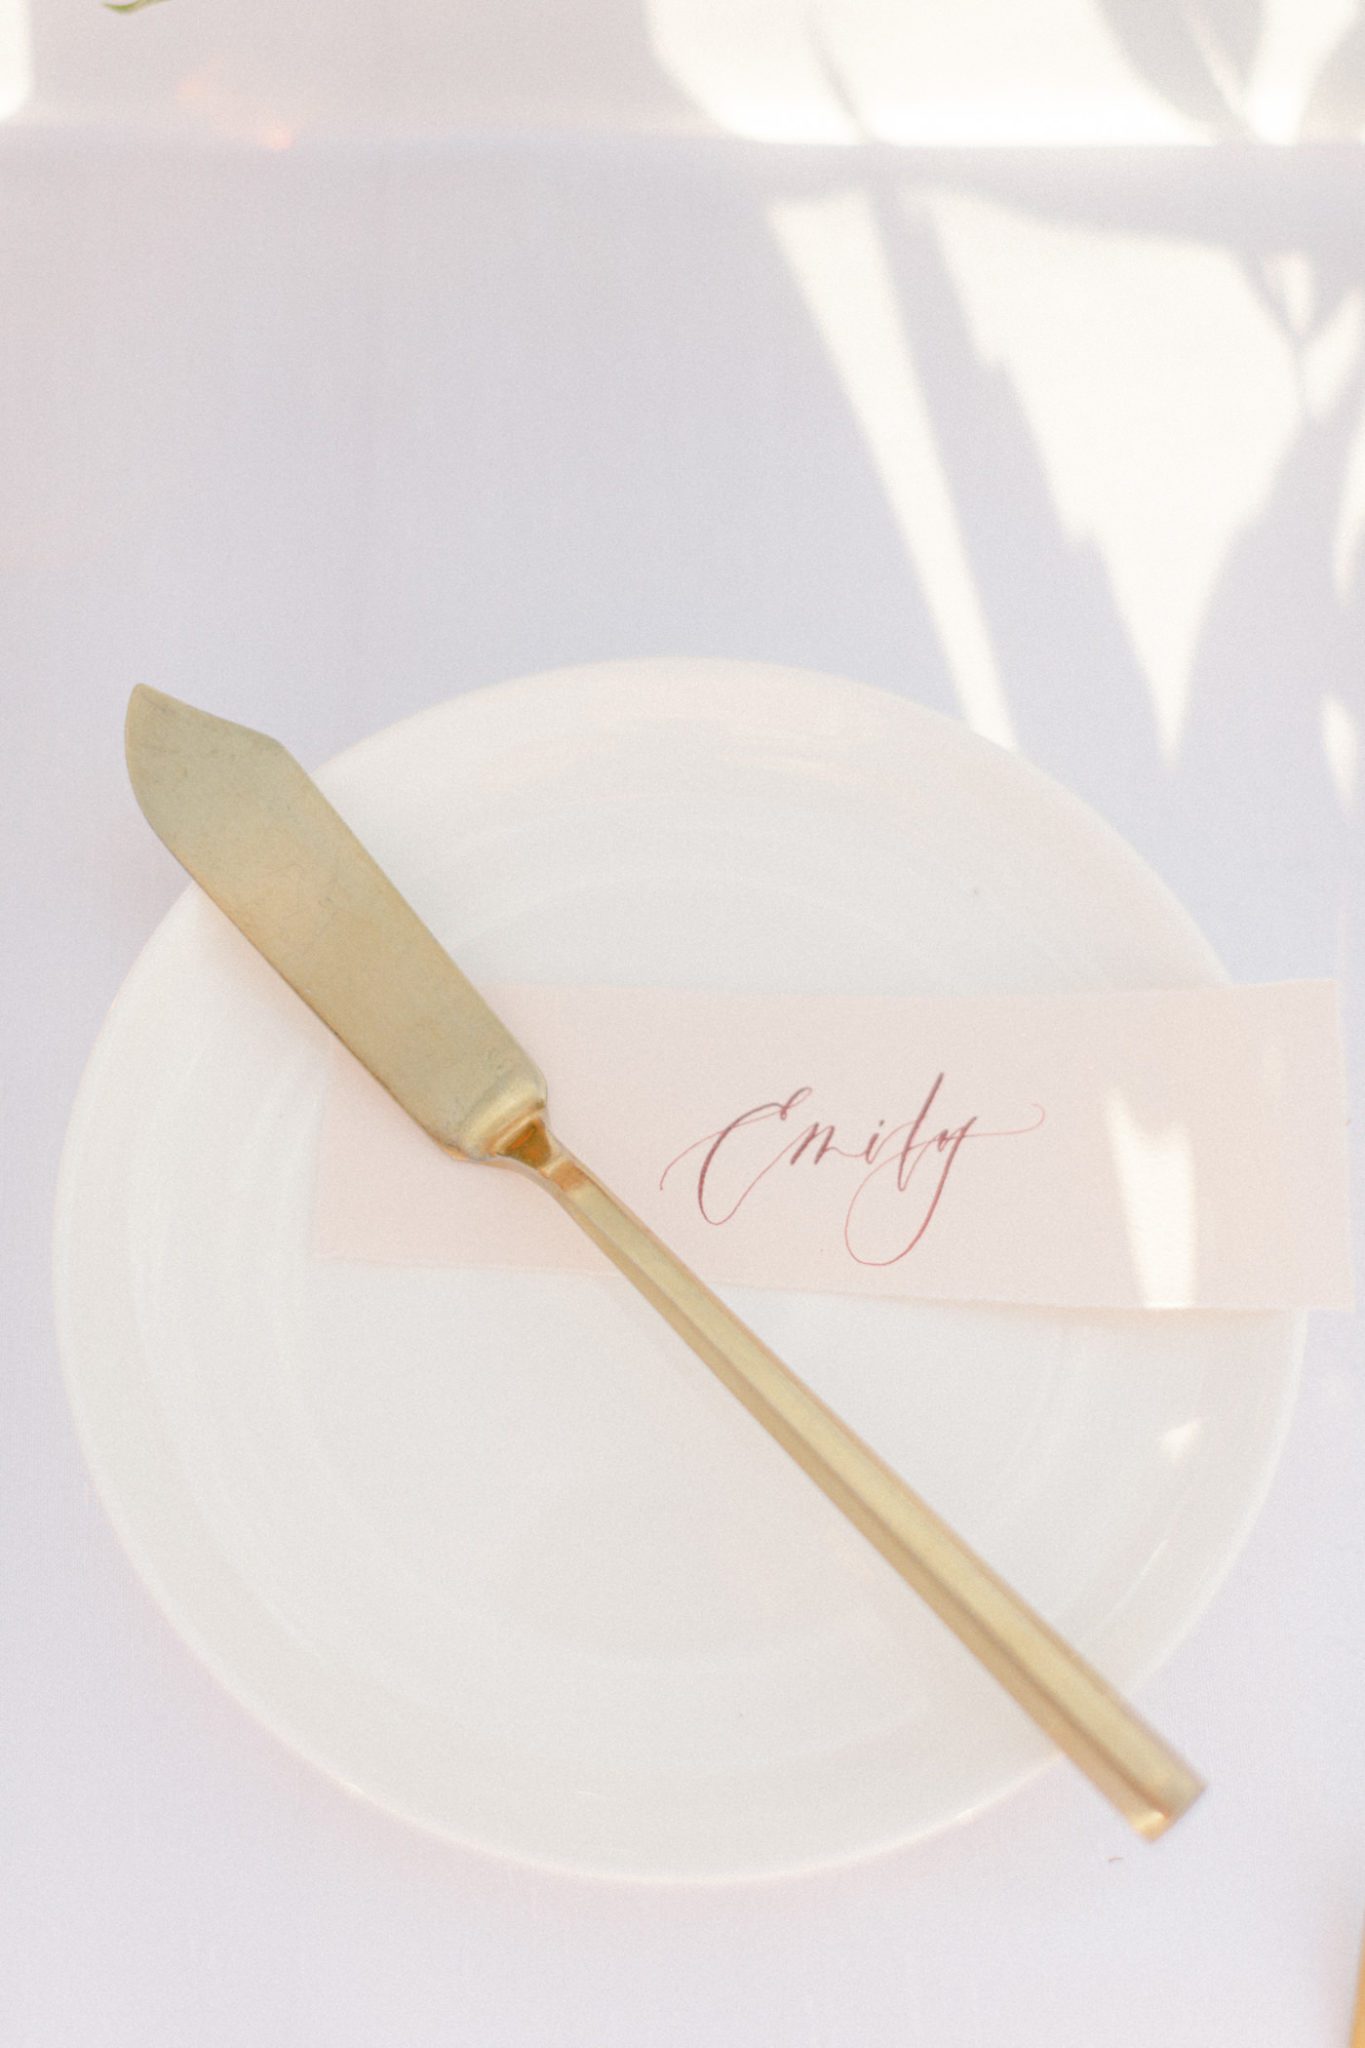 Romantic wedding day place card